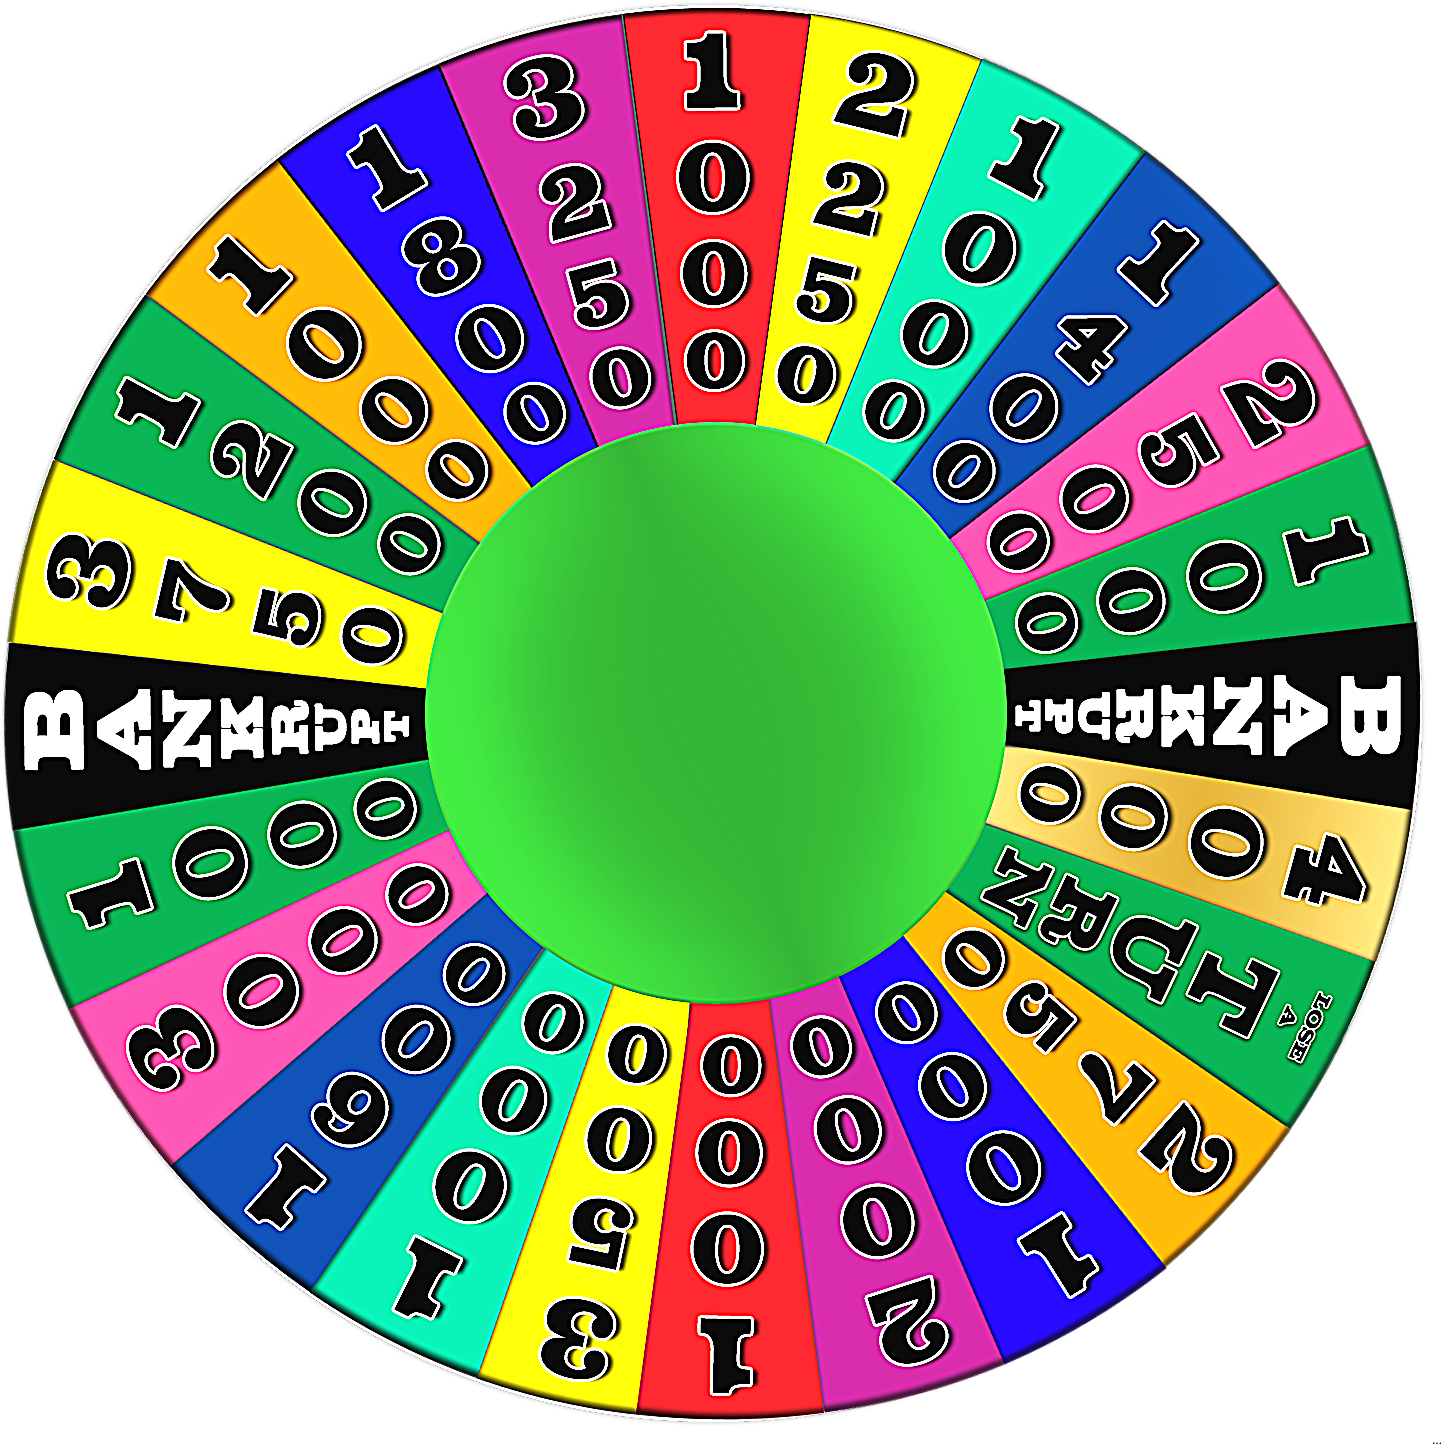 Free Wheel Of Fortune Powerpoint Game Template Images - Wheel Of Fortune Wheel Template (1500x1500)